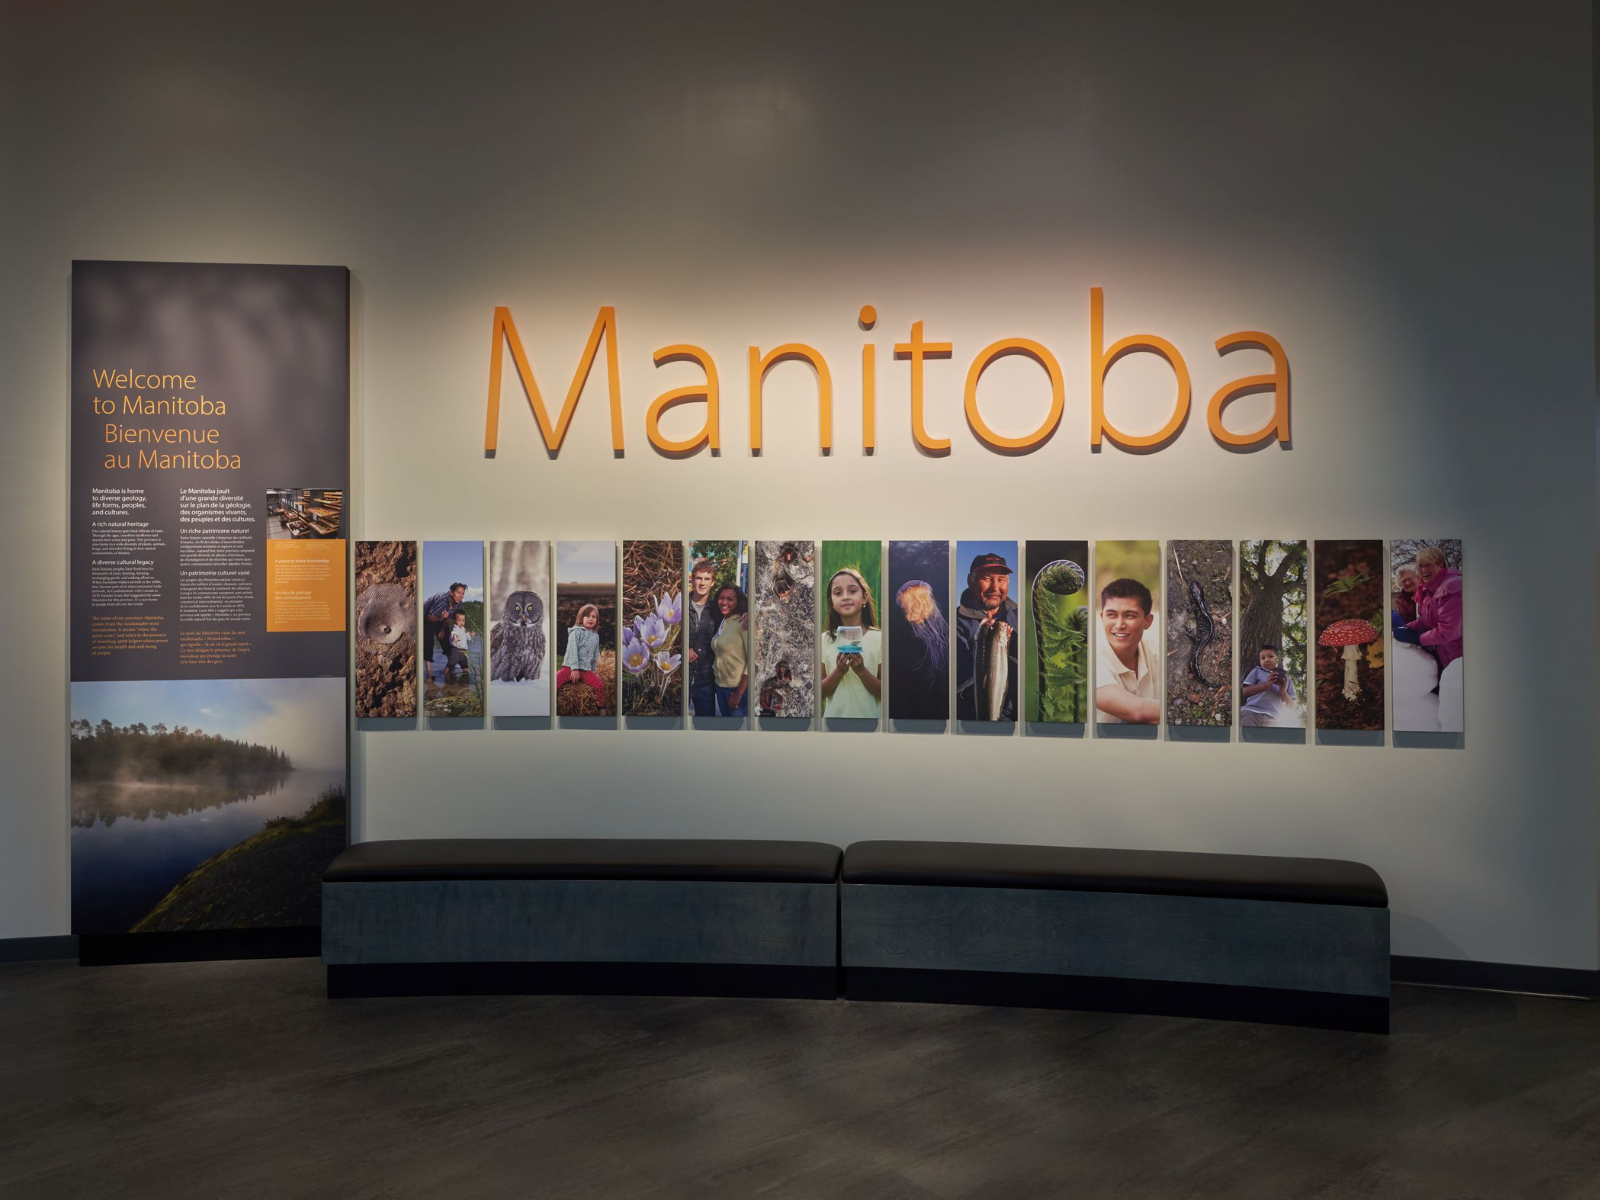 Two benches in front of a wall featuring a series of photographs of Manitoba people and nature. Above the photographs is written "Manitoba", and to the left is a text panel titled, "Welcome to Manitoba".